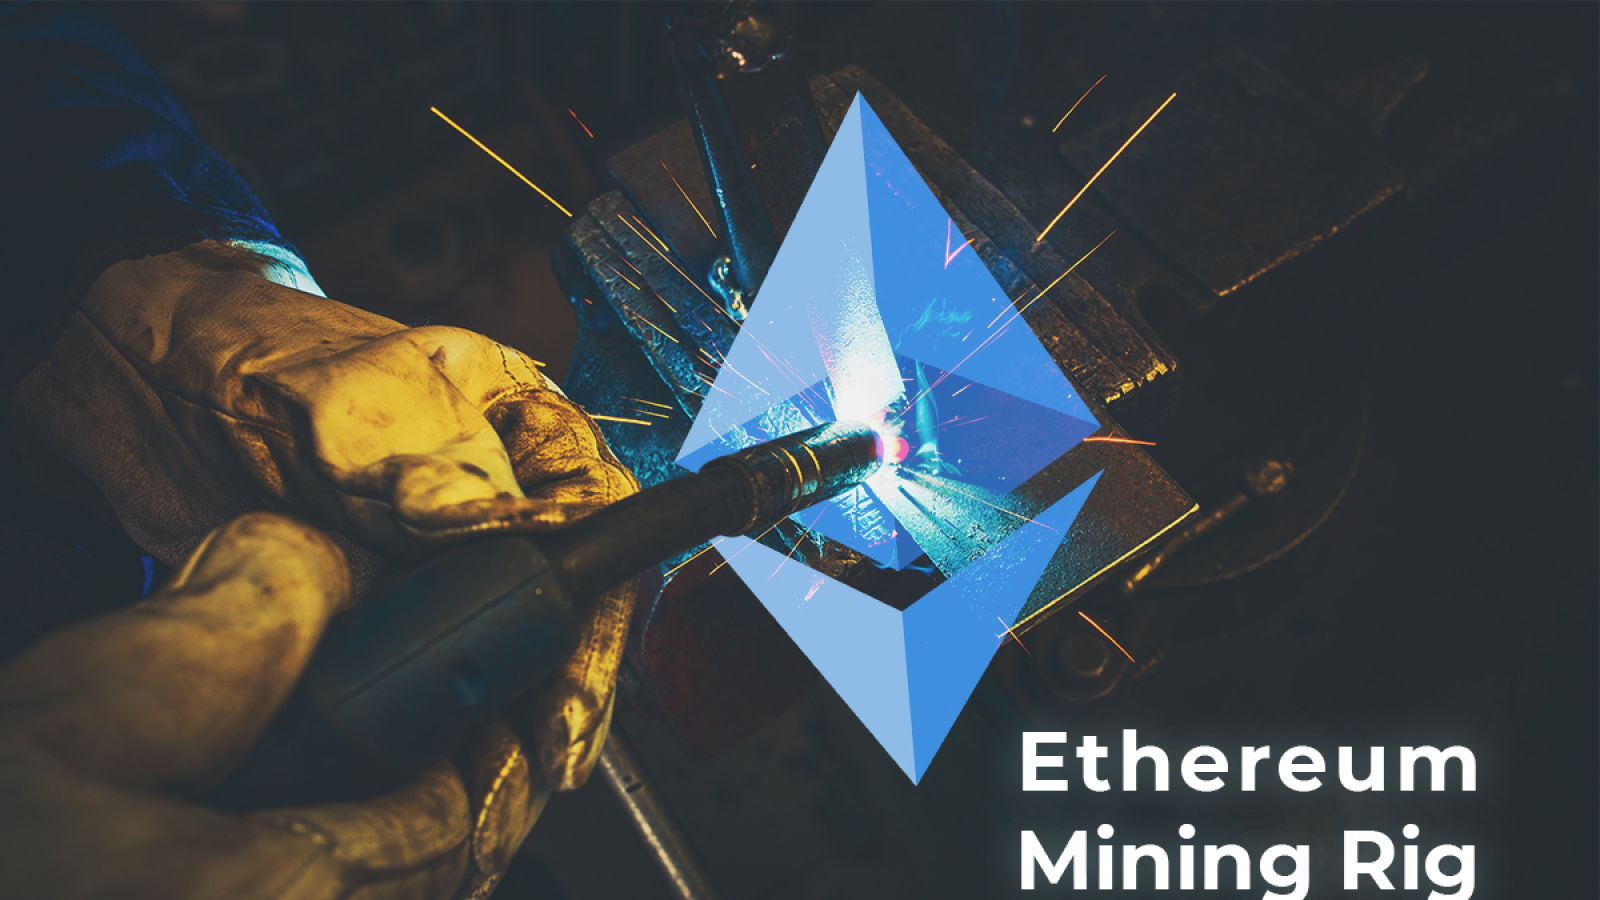 Building Ethereum Mining Rig: Step by Step Guide